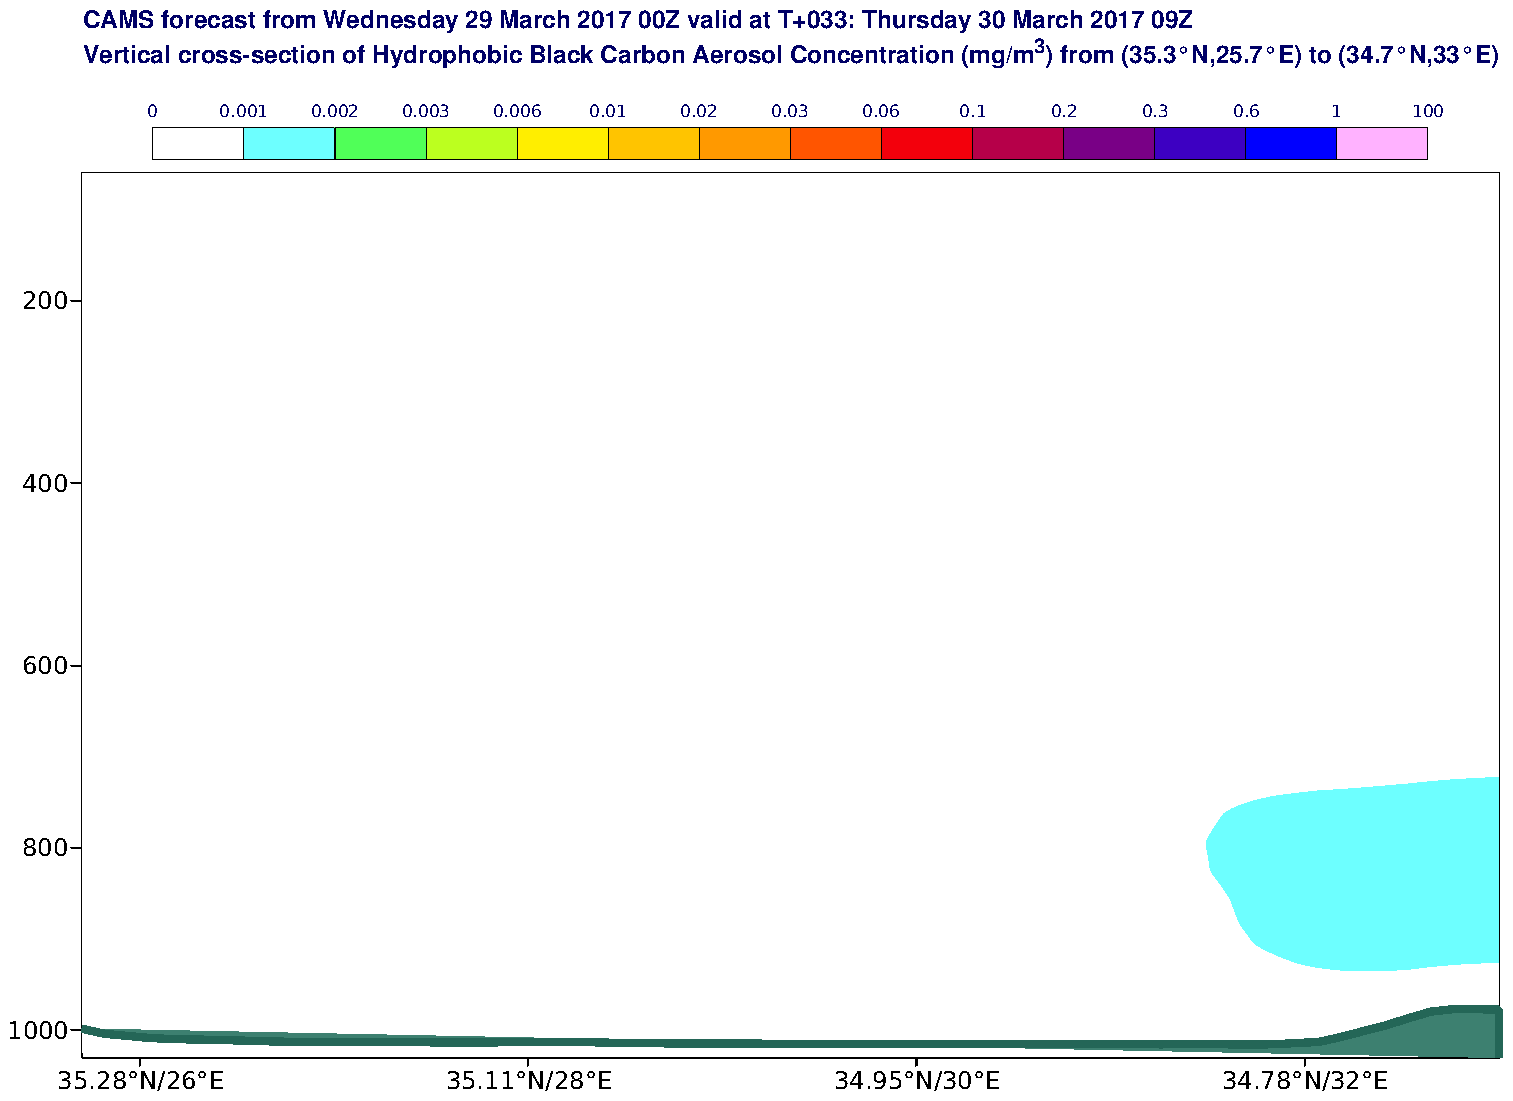 Vertical cross-section of Hydrophobic Black Carbon Aerosol Concentration (mg/m3) valid at T33 - 2017-03-30 09:00